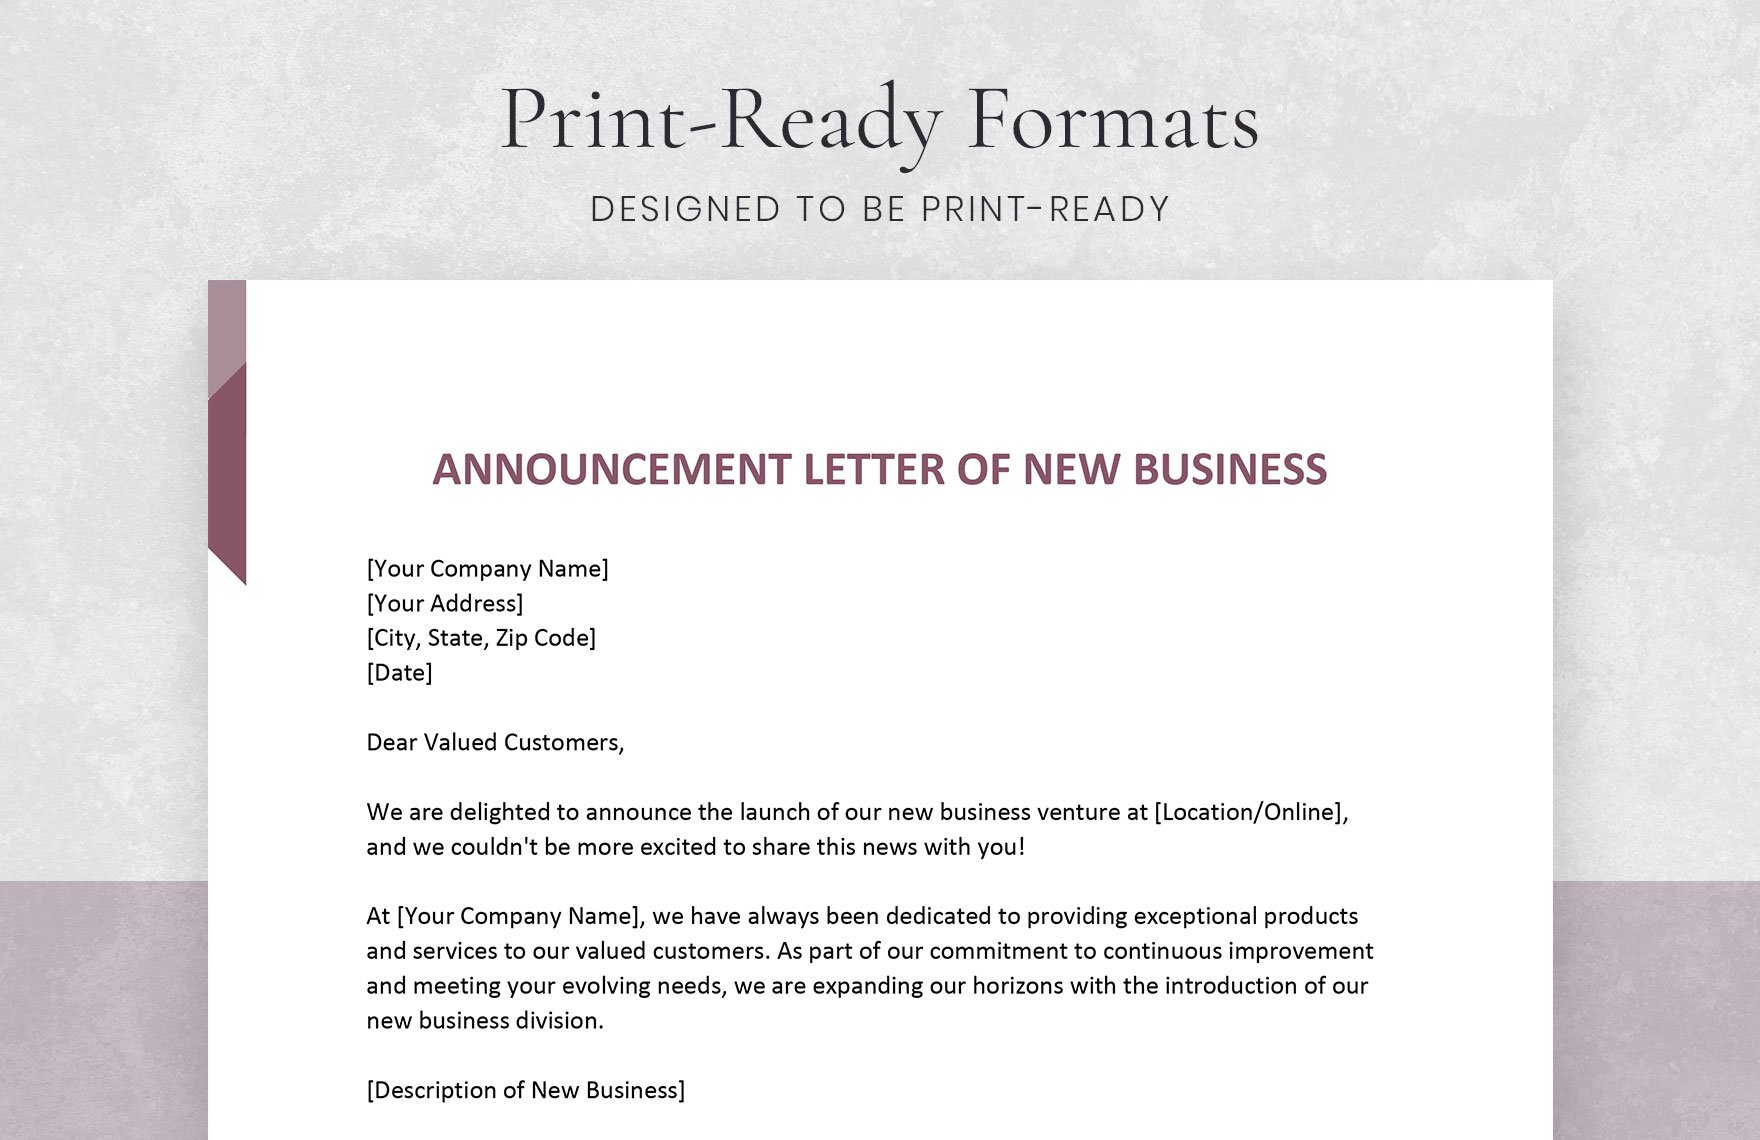 Announcement Letter of New Business